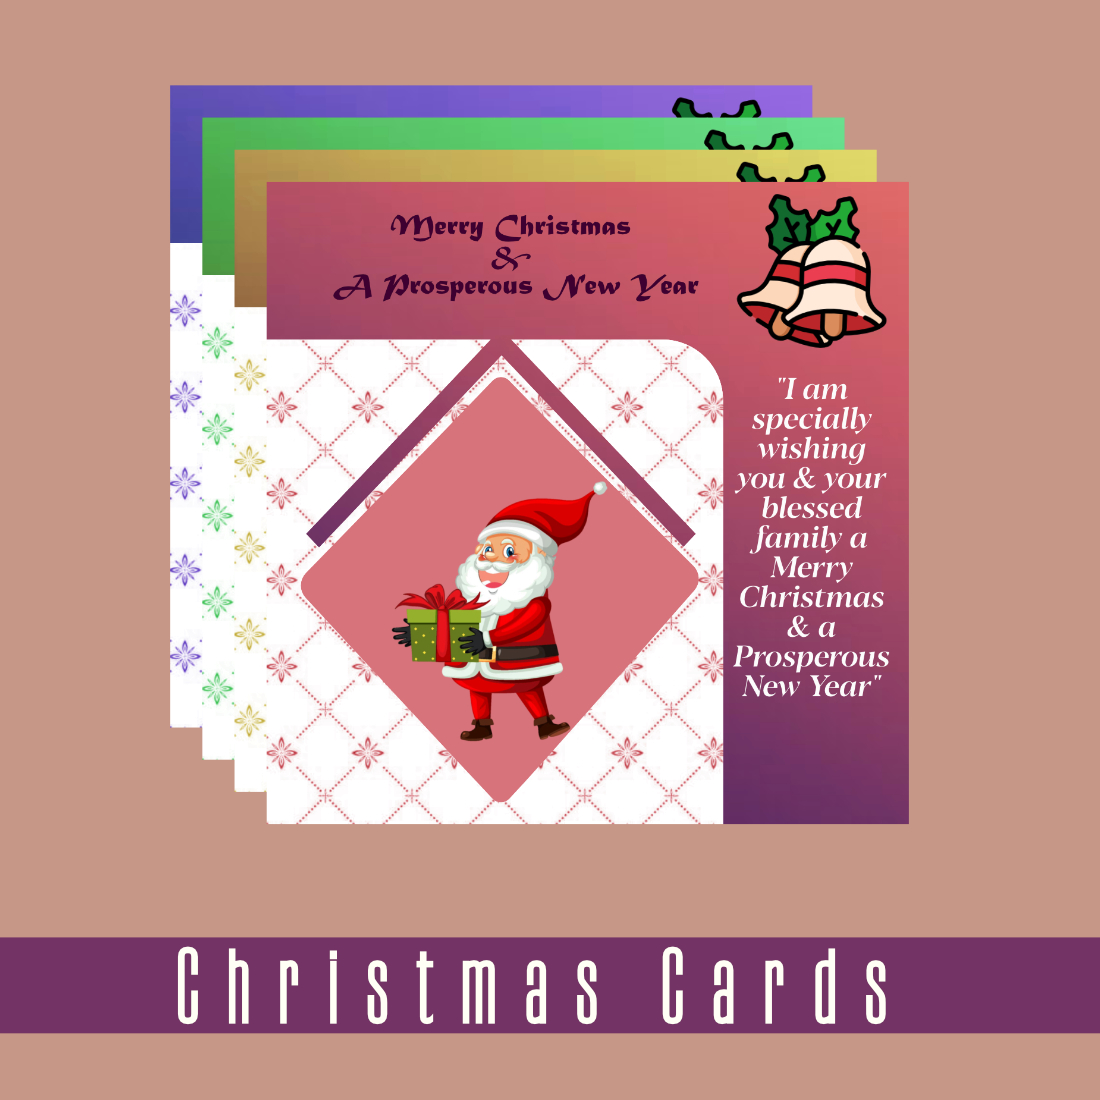 8 Beautifully Designed Vector Christmas Cards with Heartfelt Christmas Wishes cover image.